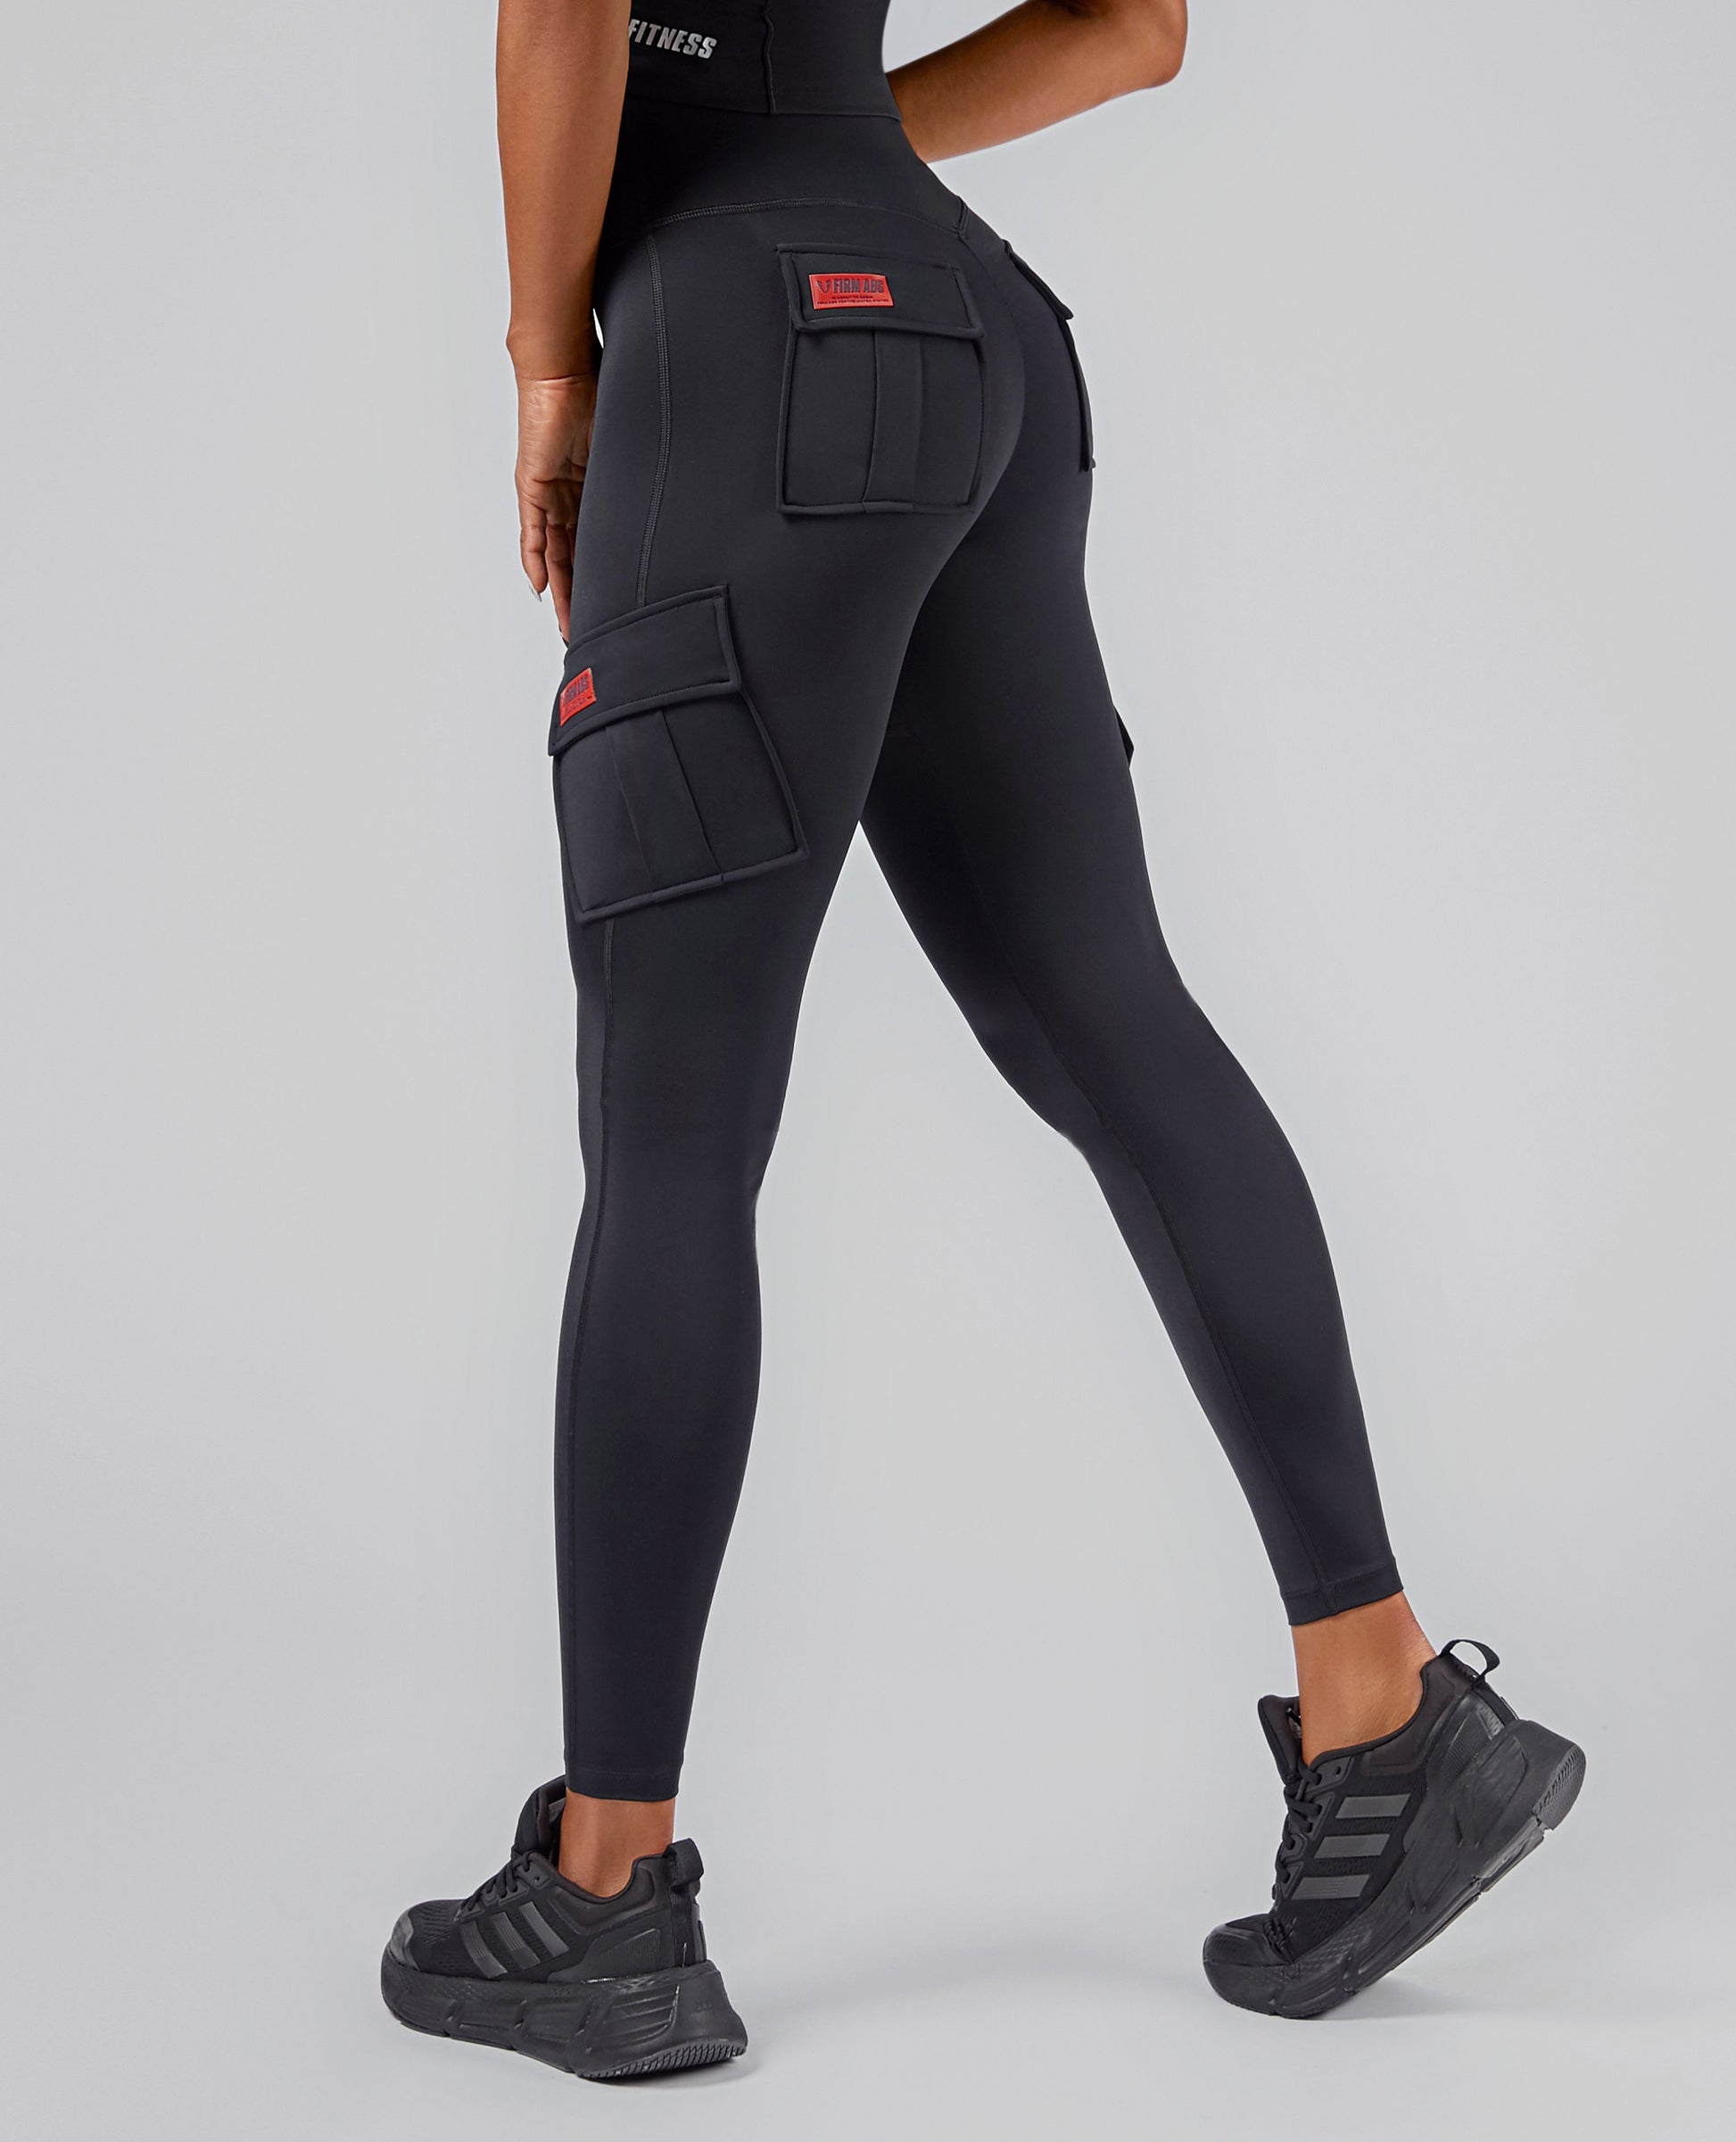 Bottoms: Athletic Leggings & Shorts, FIRM ABS Activewear